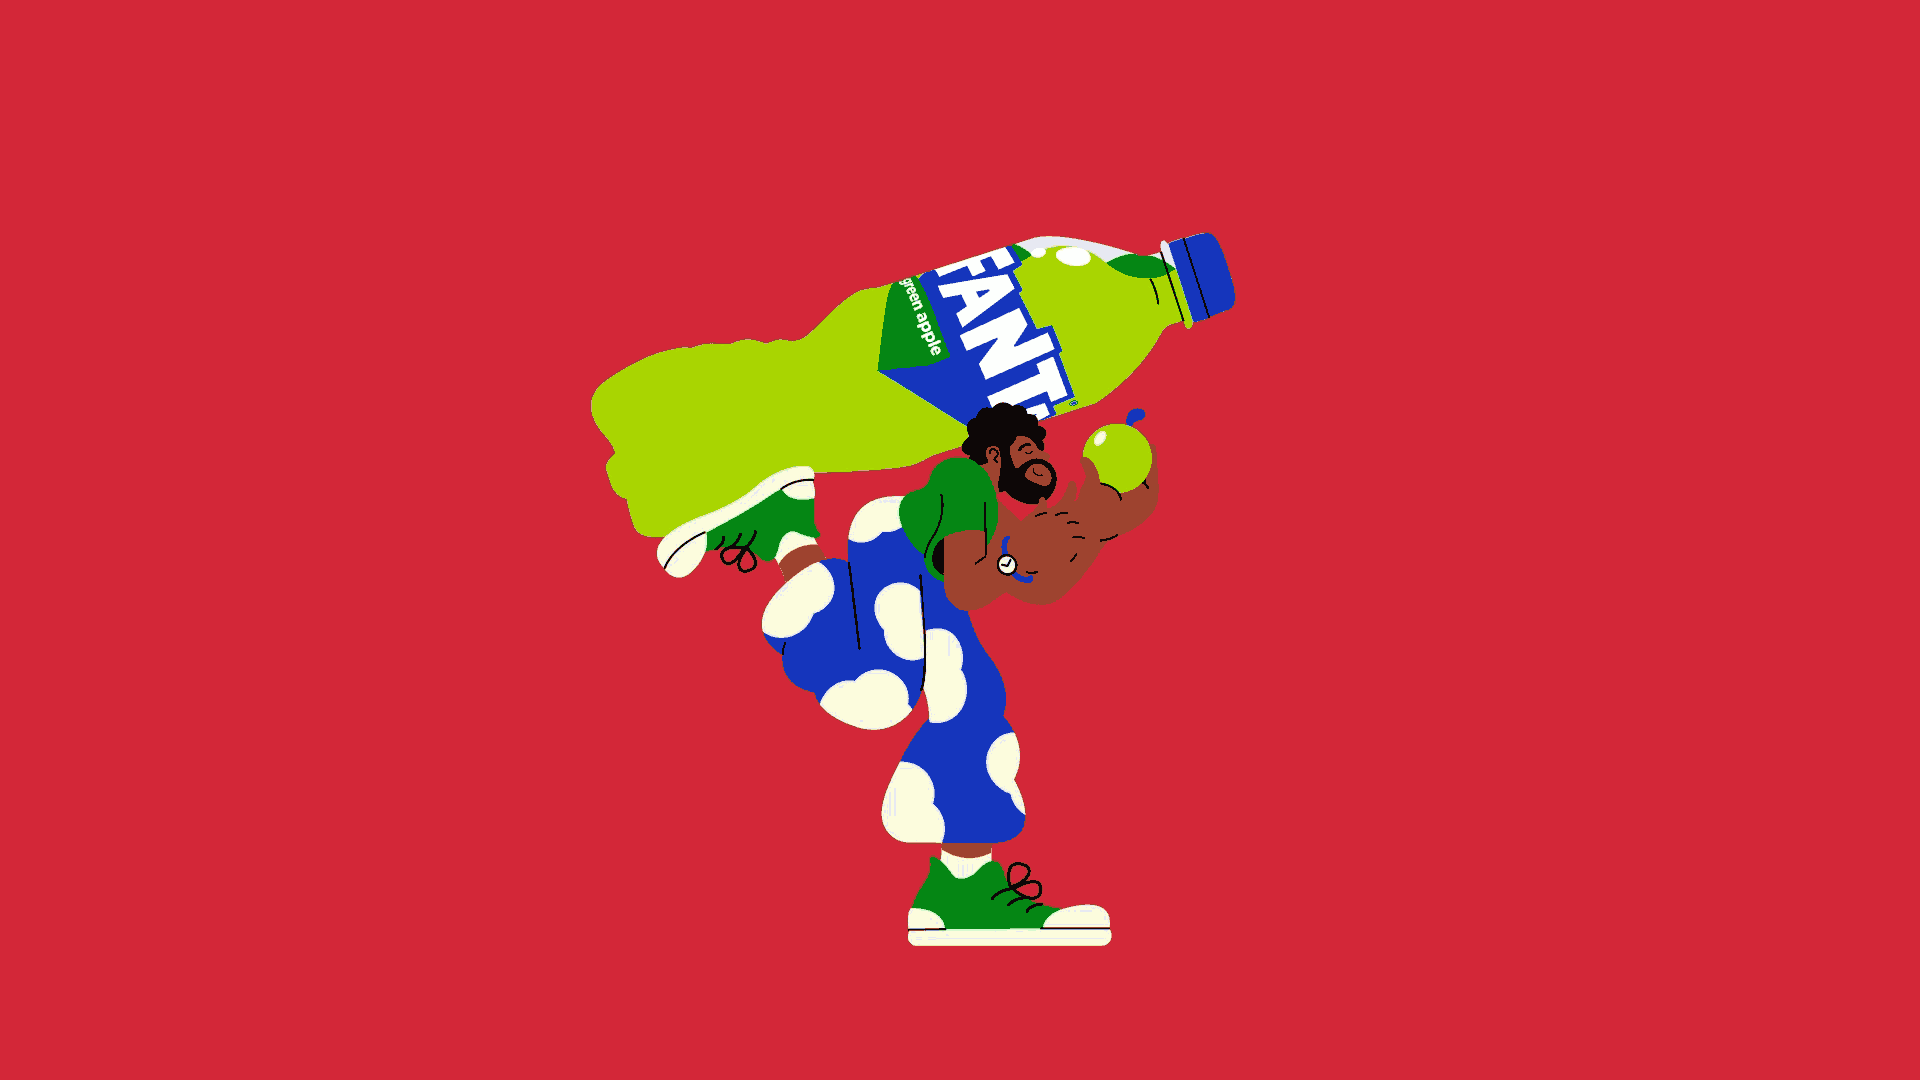 Animation of an illustrated character carrying a bottle of green Fanta on their shoulders